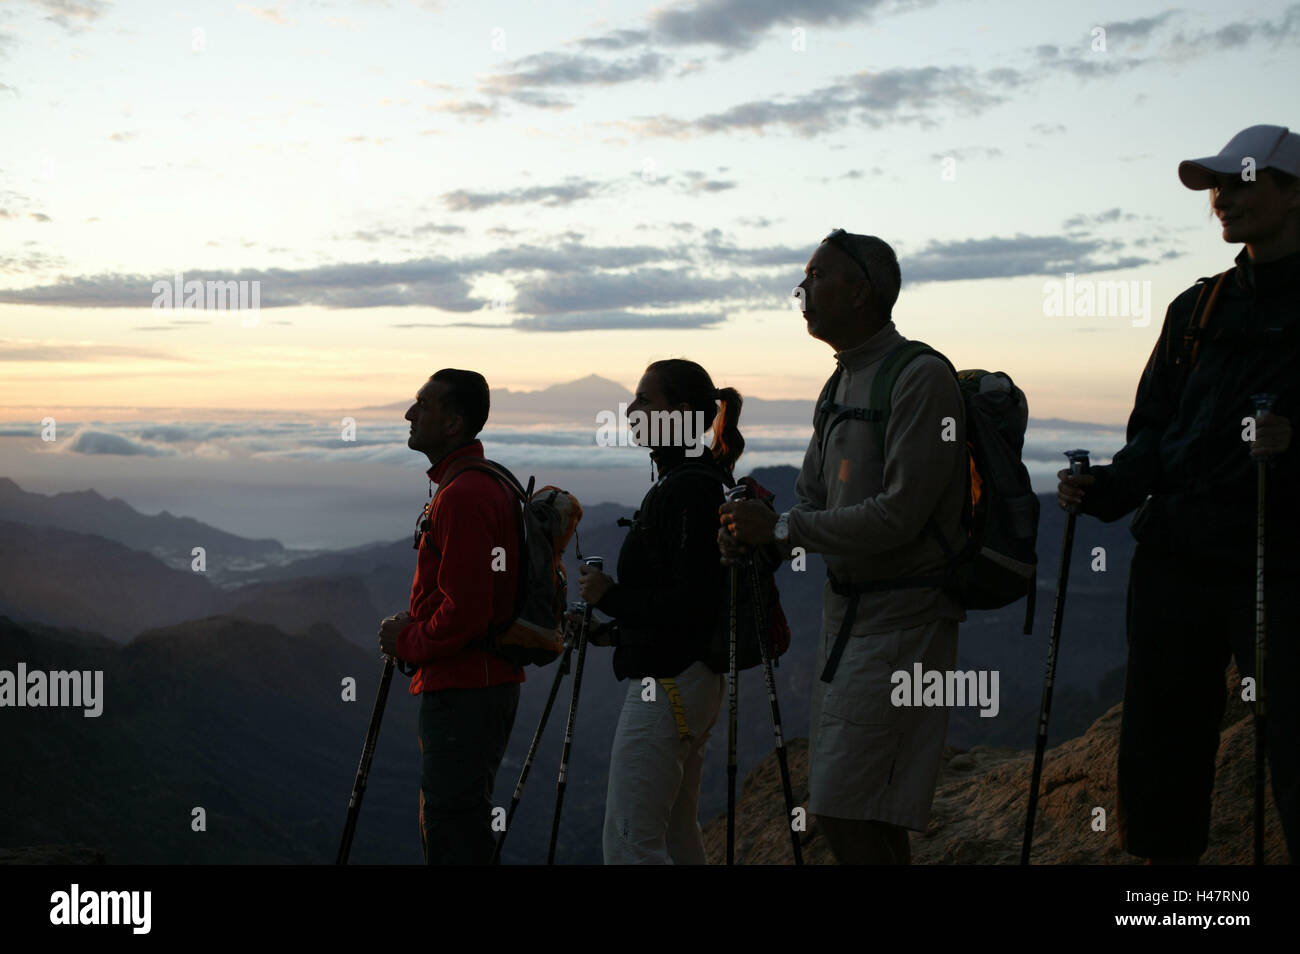 Traveling-group, standing, rocks, pause, traveling-equipment, mountain scenery, evening-mood Stock Photo